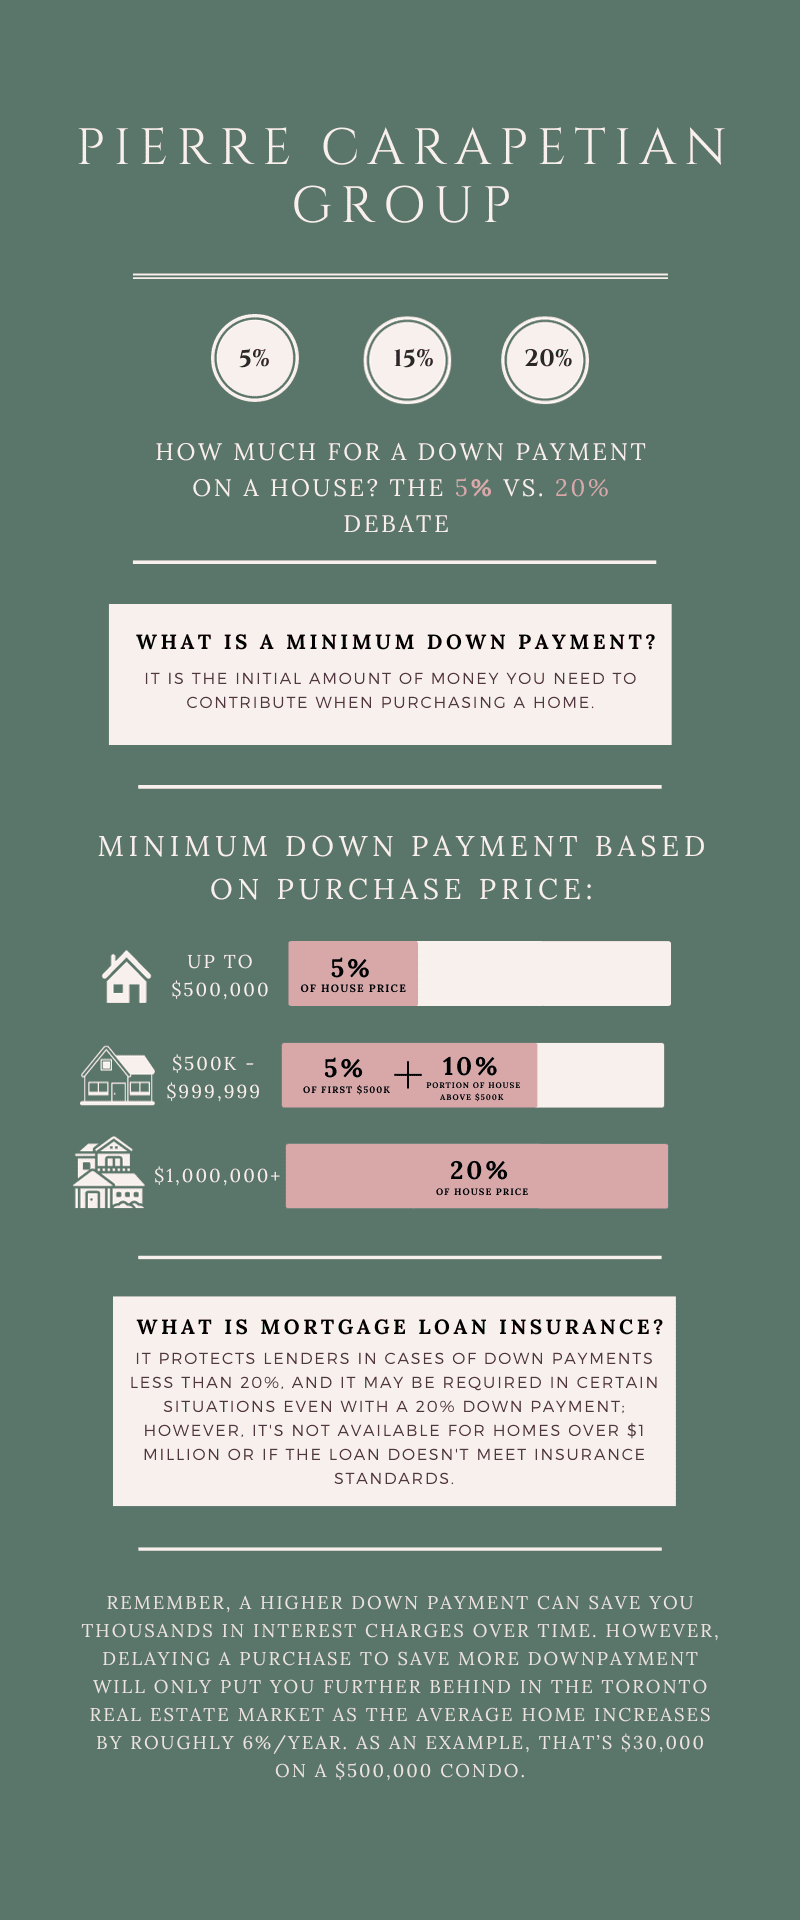 How much down payment on a house in Canada?